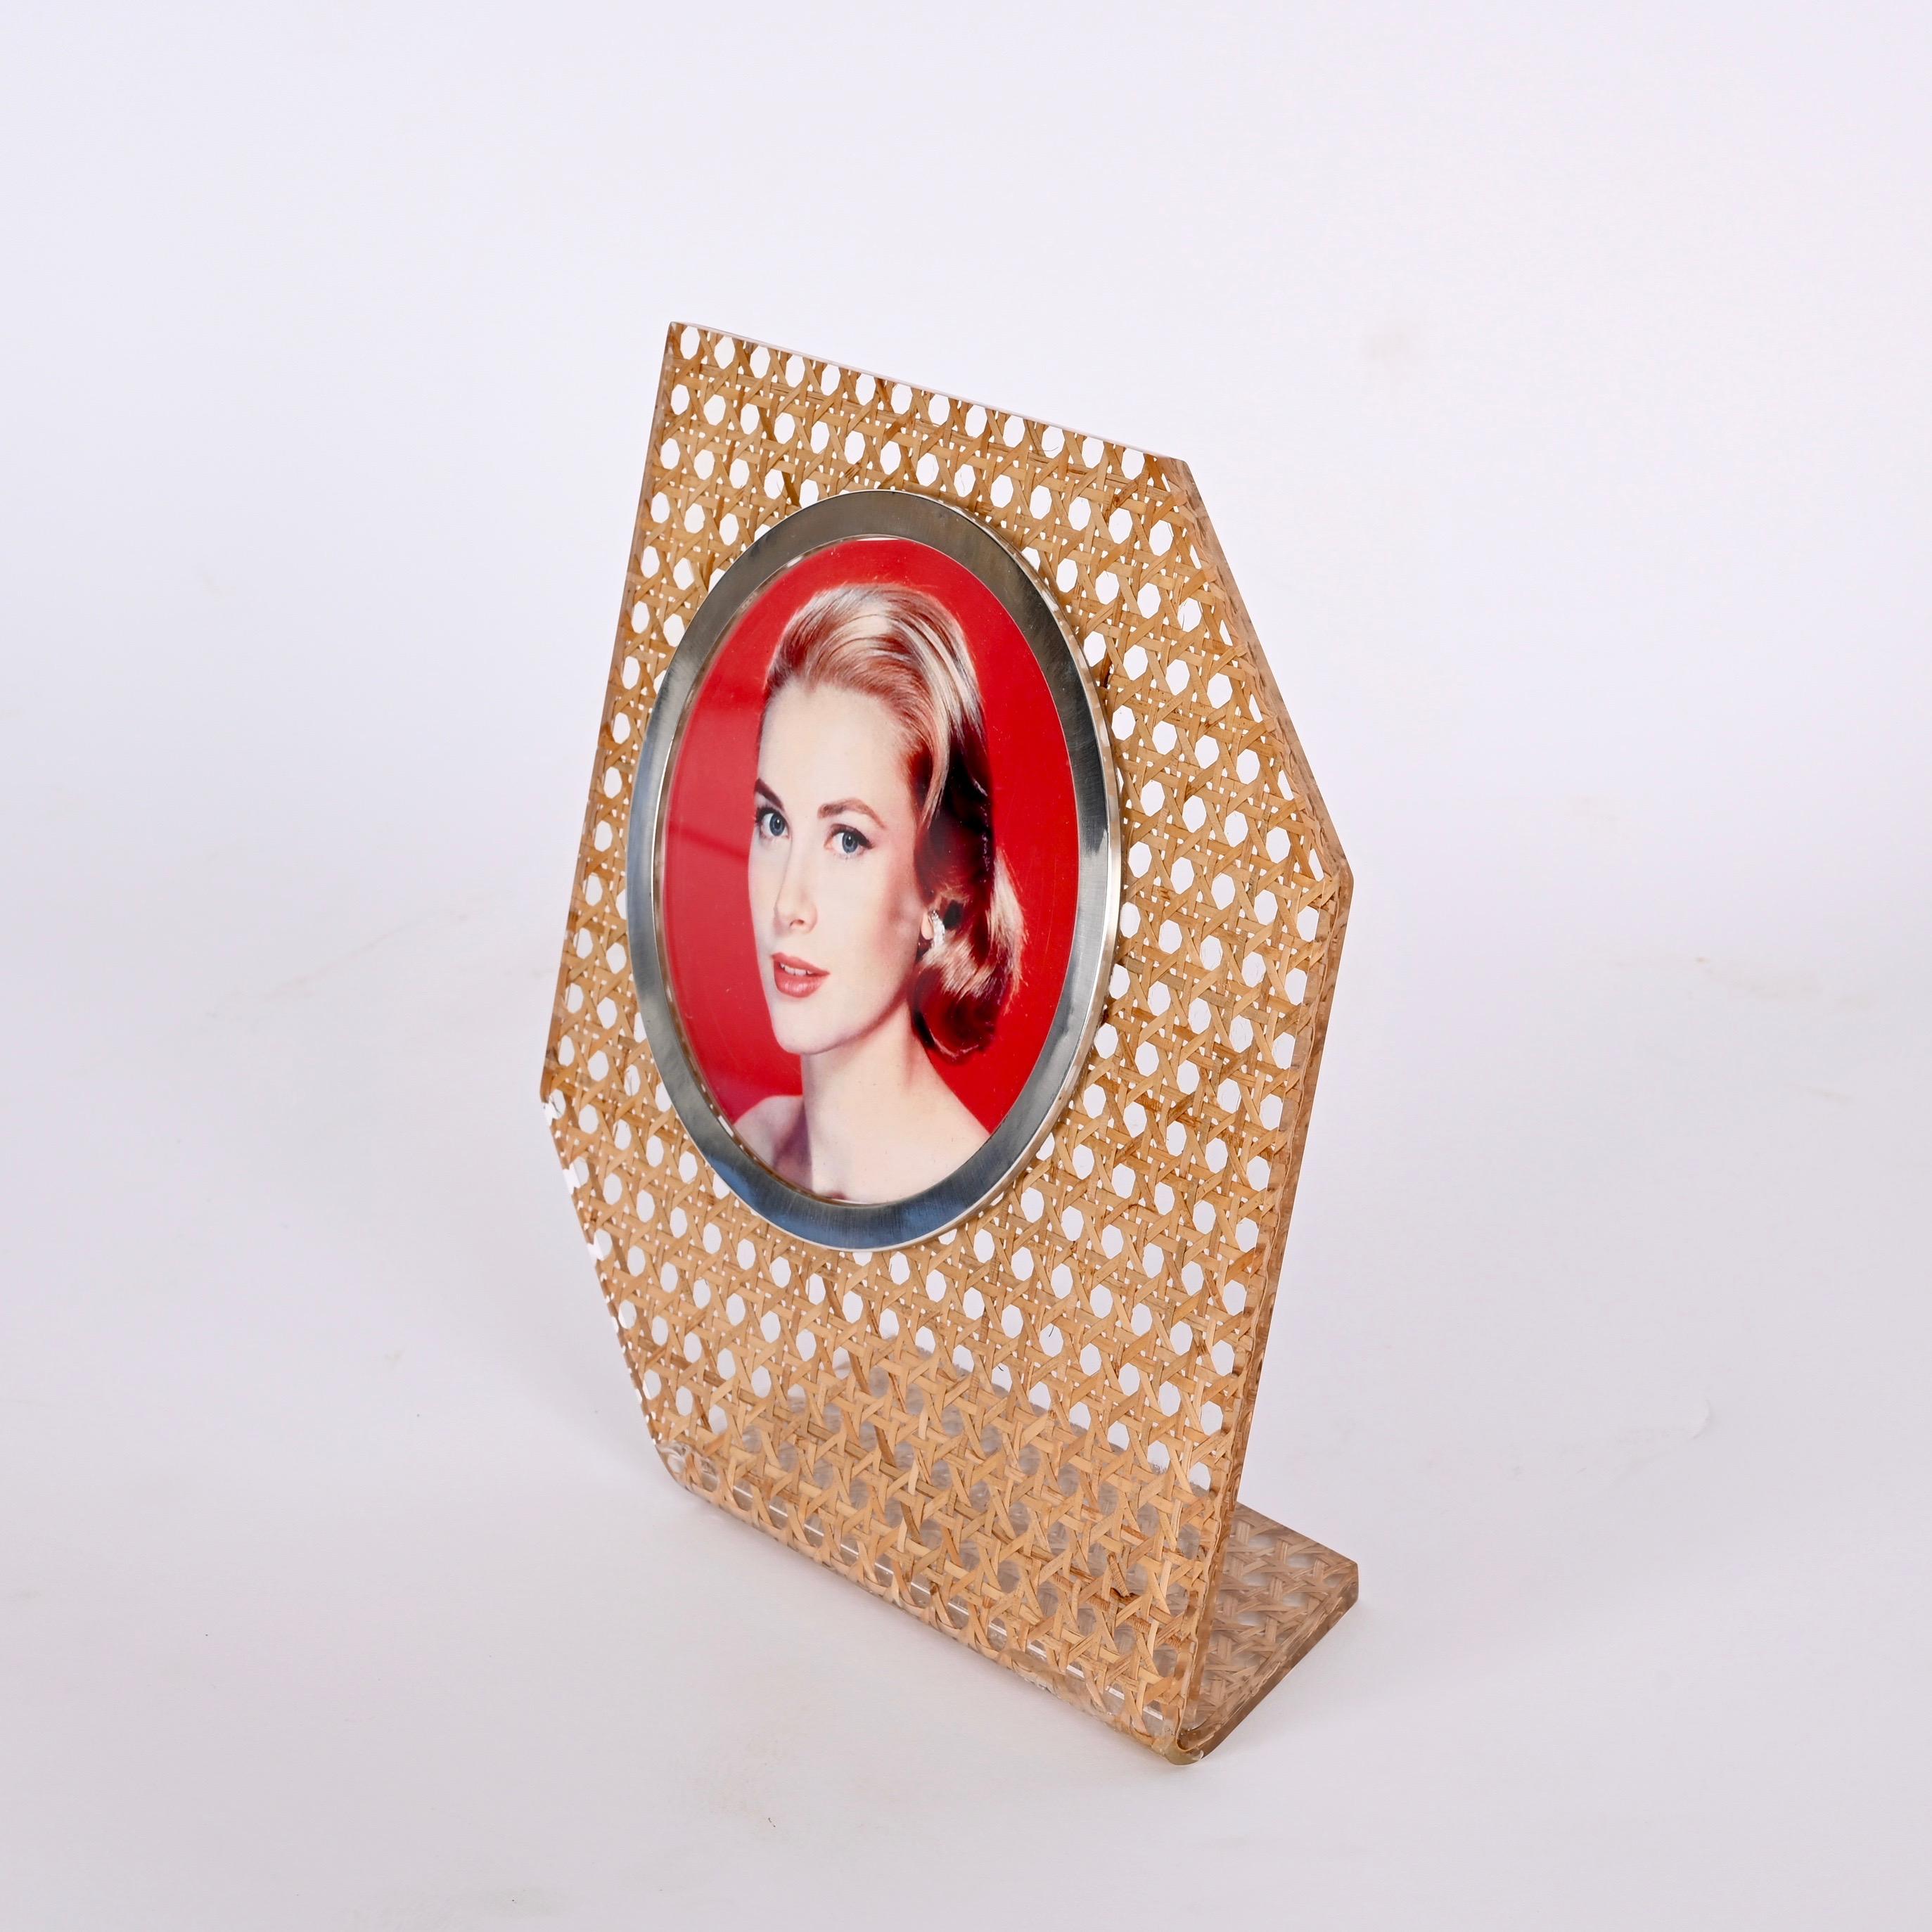 Stunning midcetury lucite and Vienna straw picture frame enriched with a silver frame. This astonishing item was made in Italy during the 1970s following the style of Christian Dior. 

This piece is unique as it has a Vienna straw structure with a